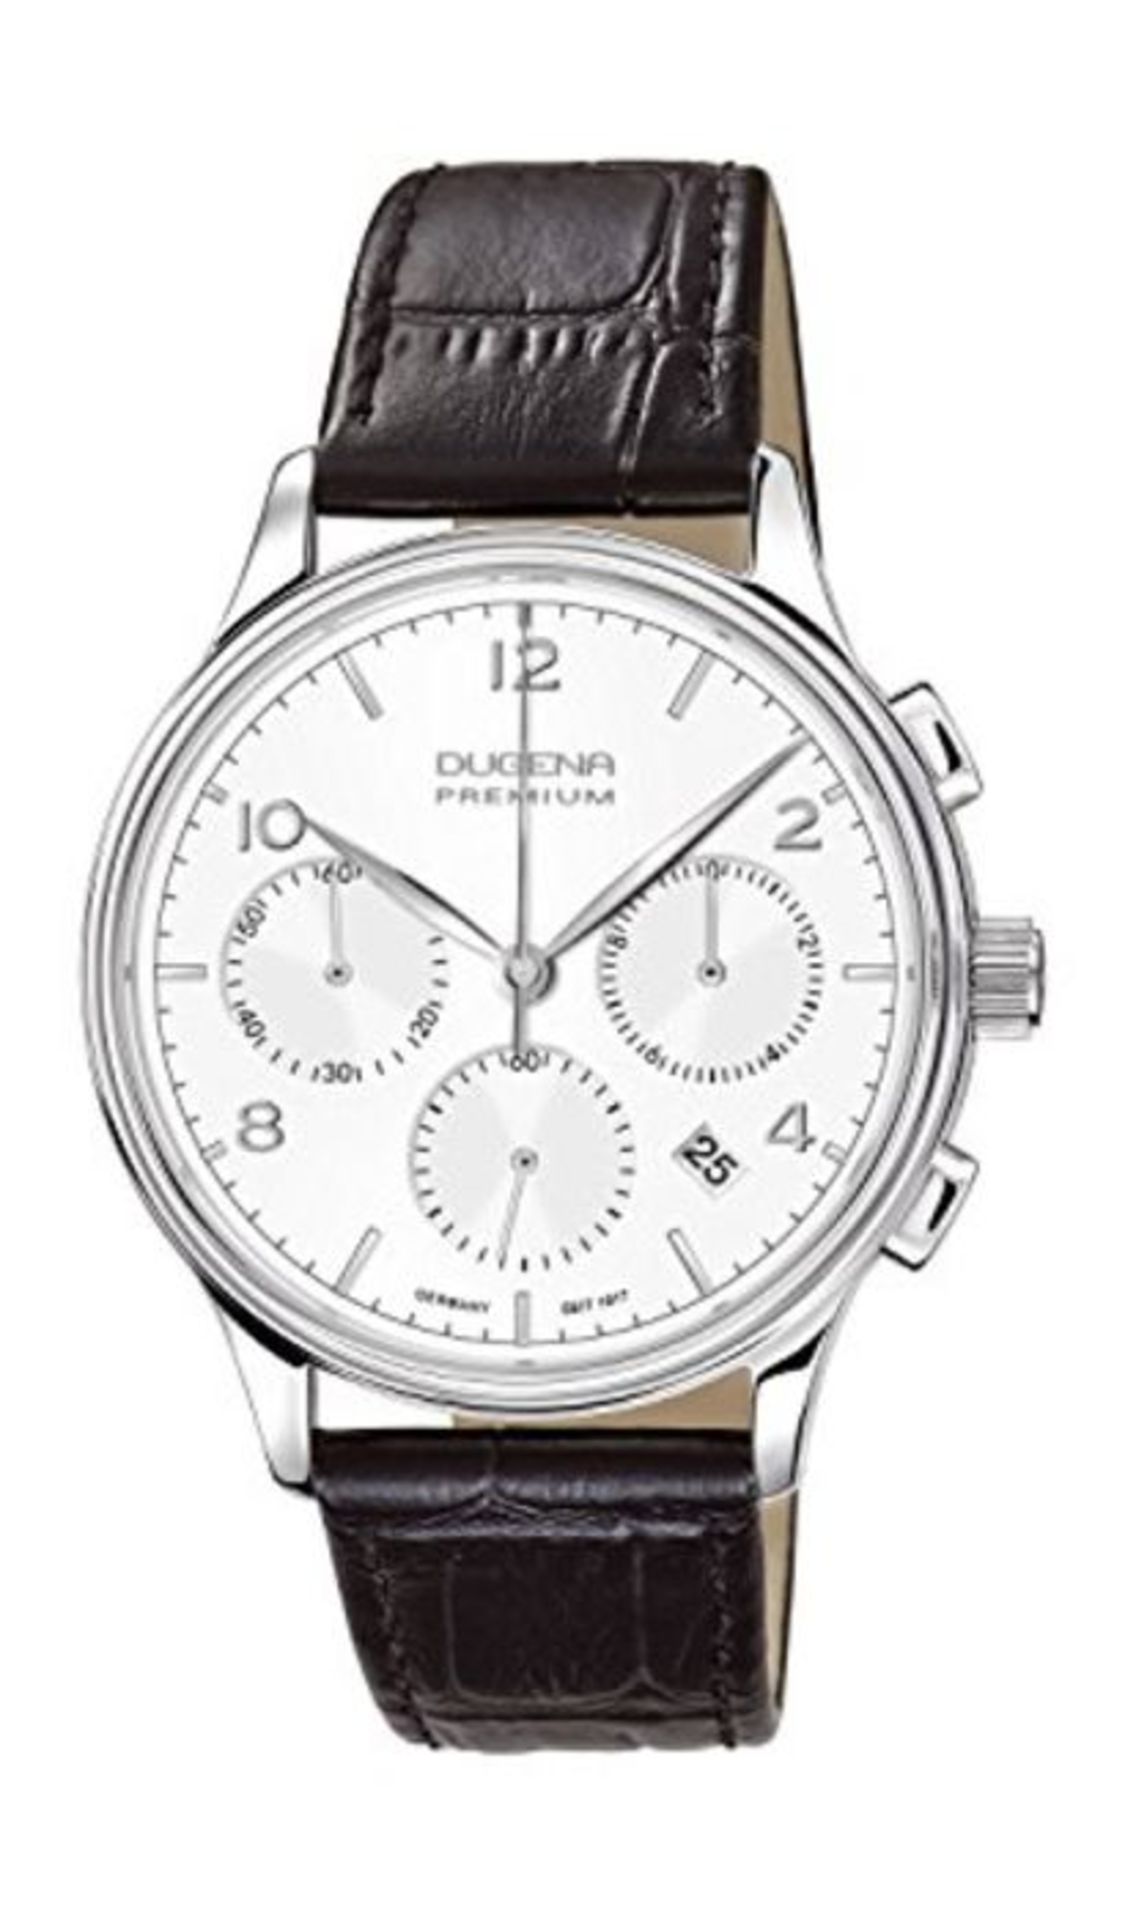 RRP £188.00 Dugena Men's Dugena Premium Quartz Watch with Silver Dial Chronograph Display and Blac